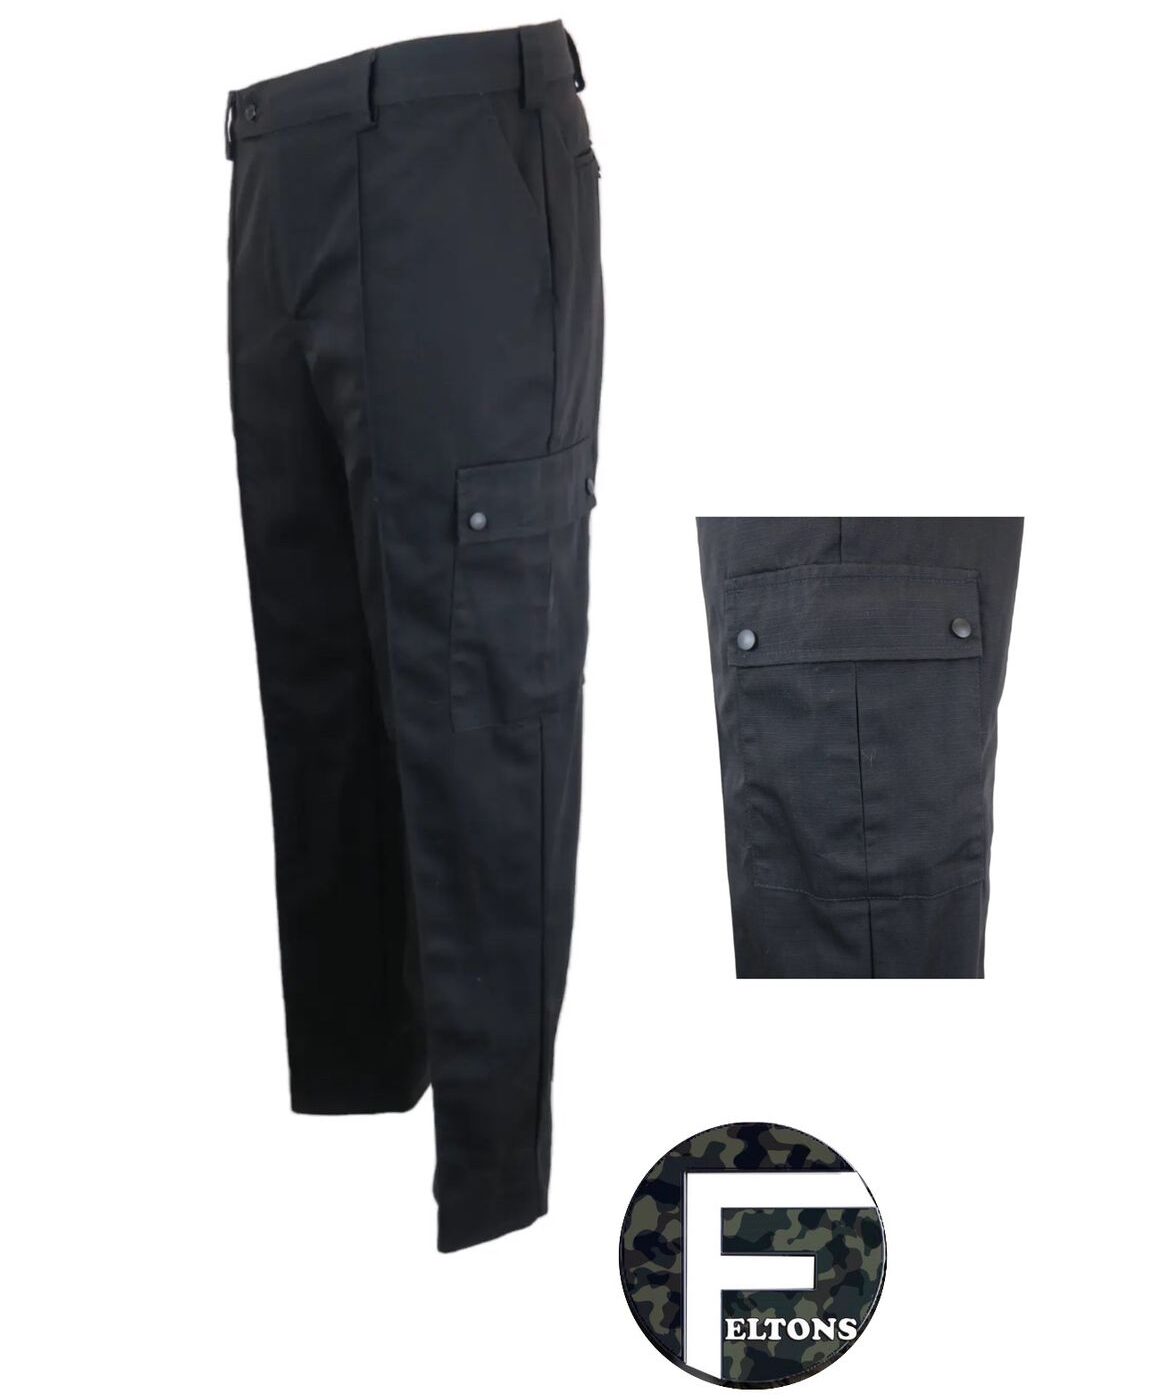 Brand new police ripstop cargo trousers in Black